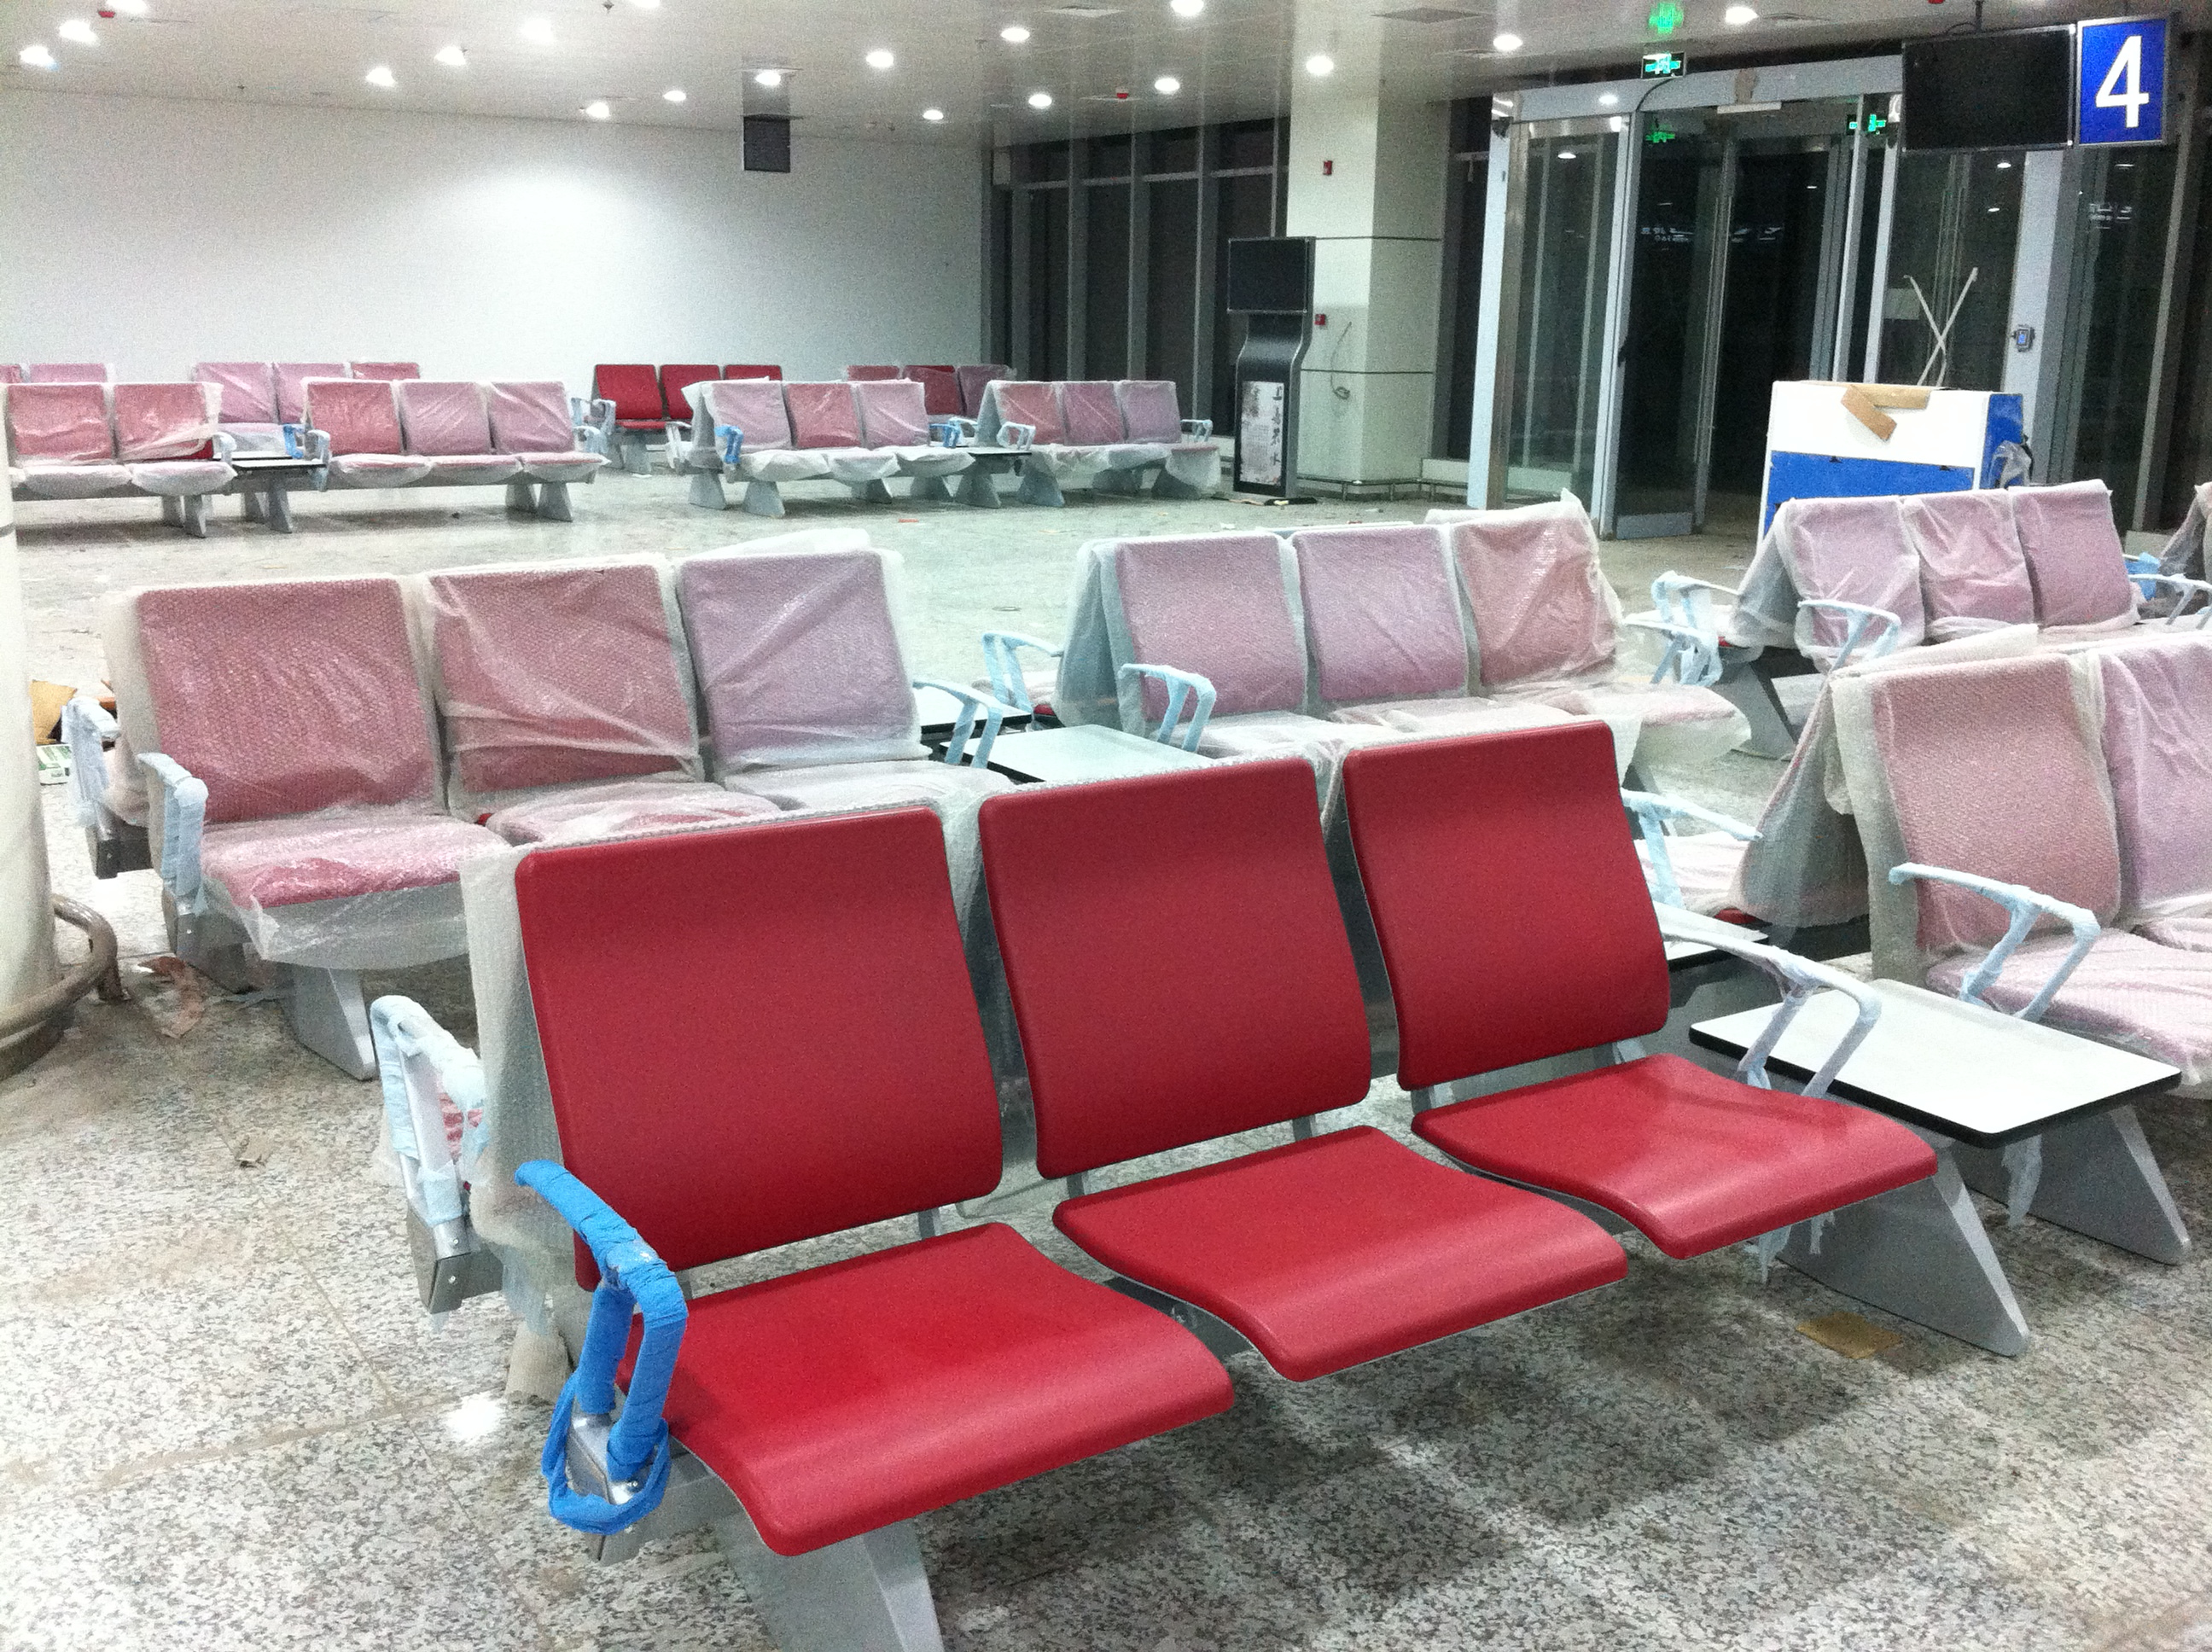 How to choose the airport chair in airport